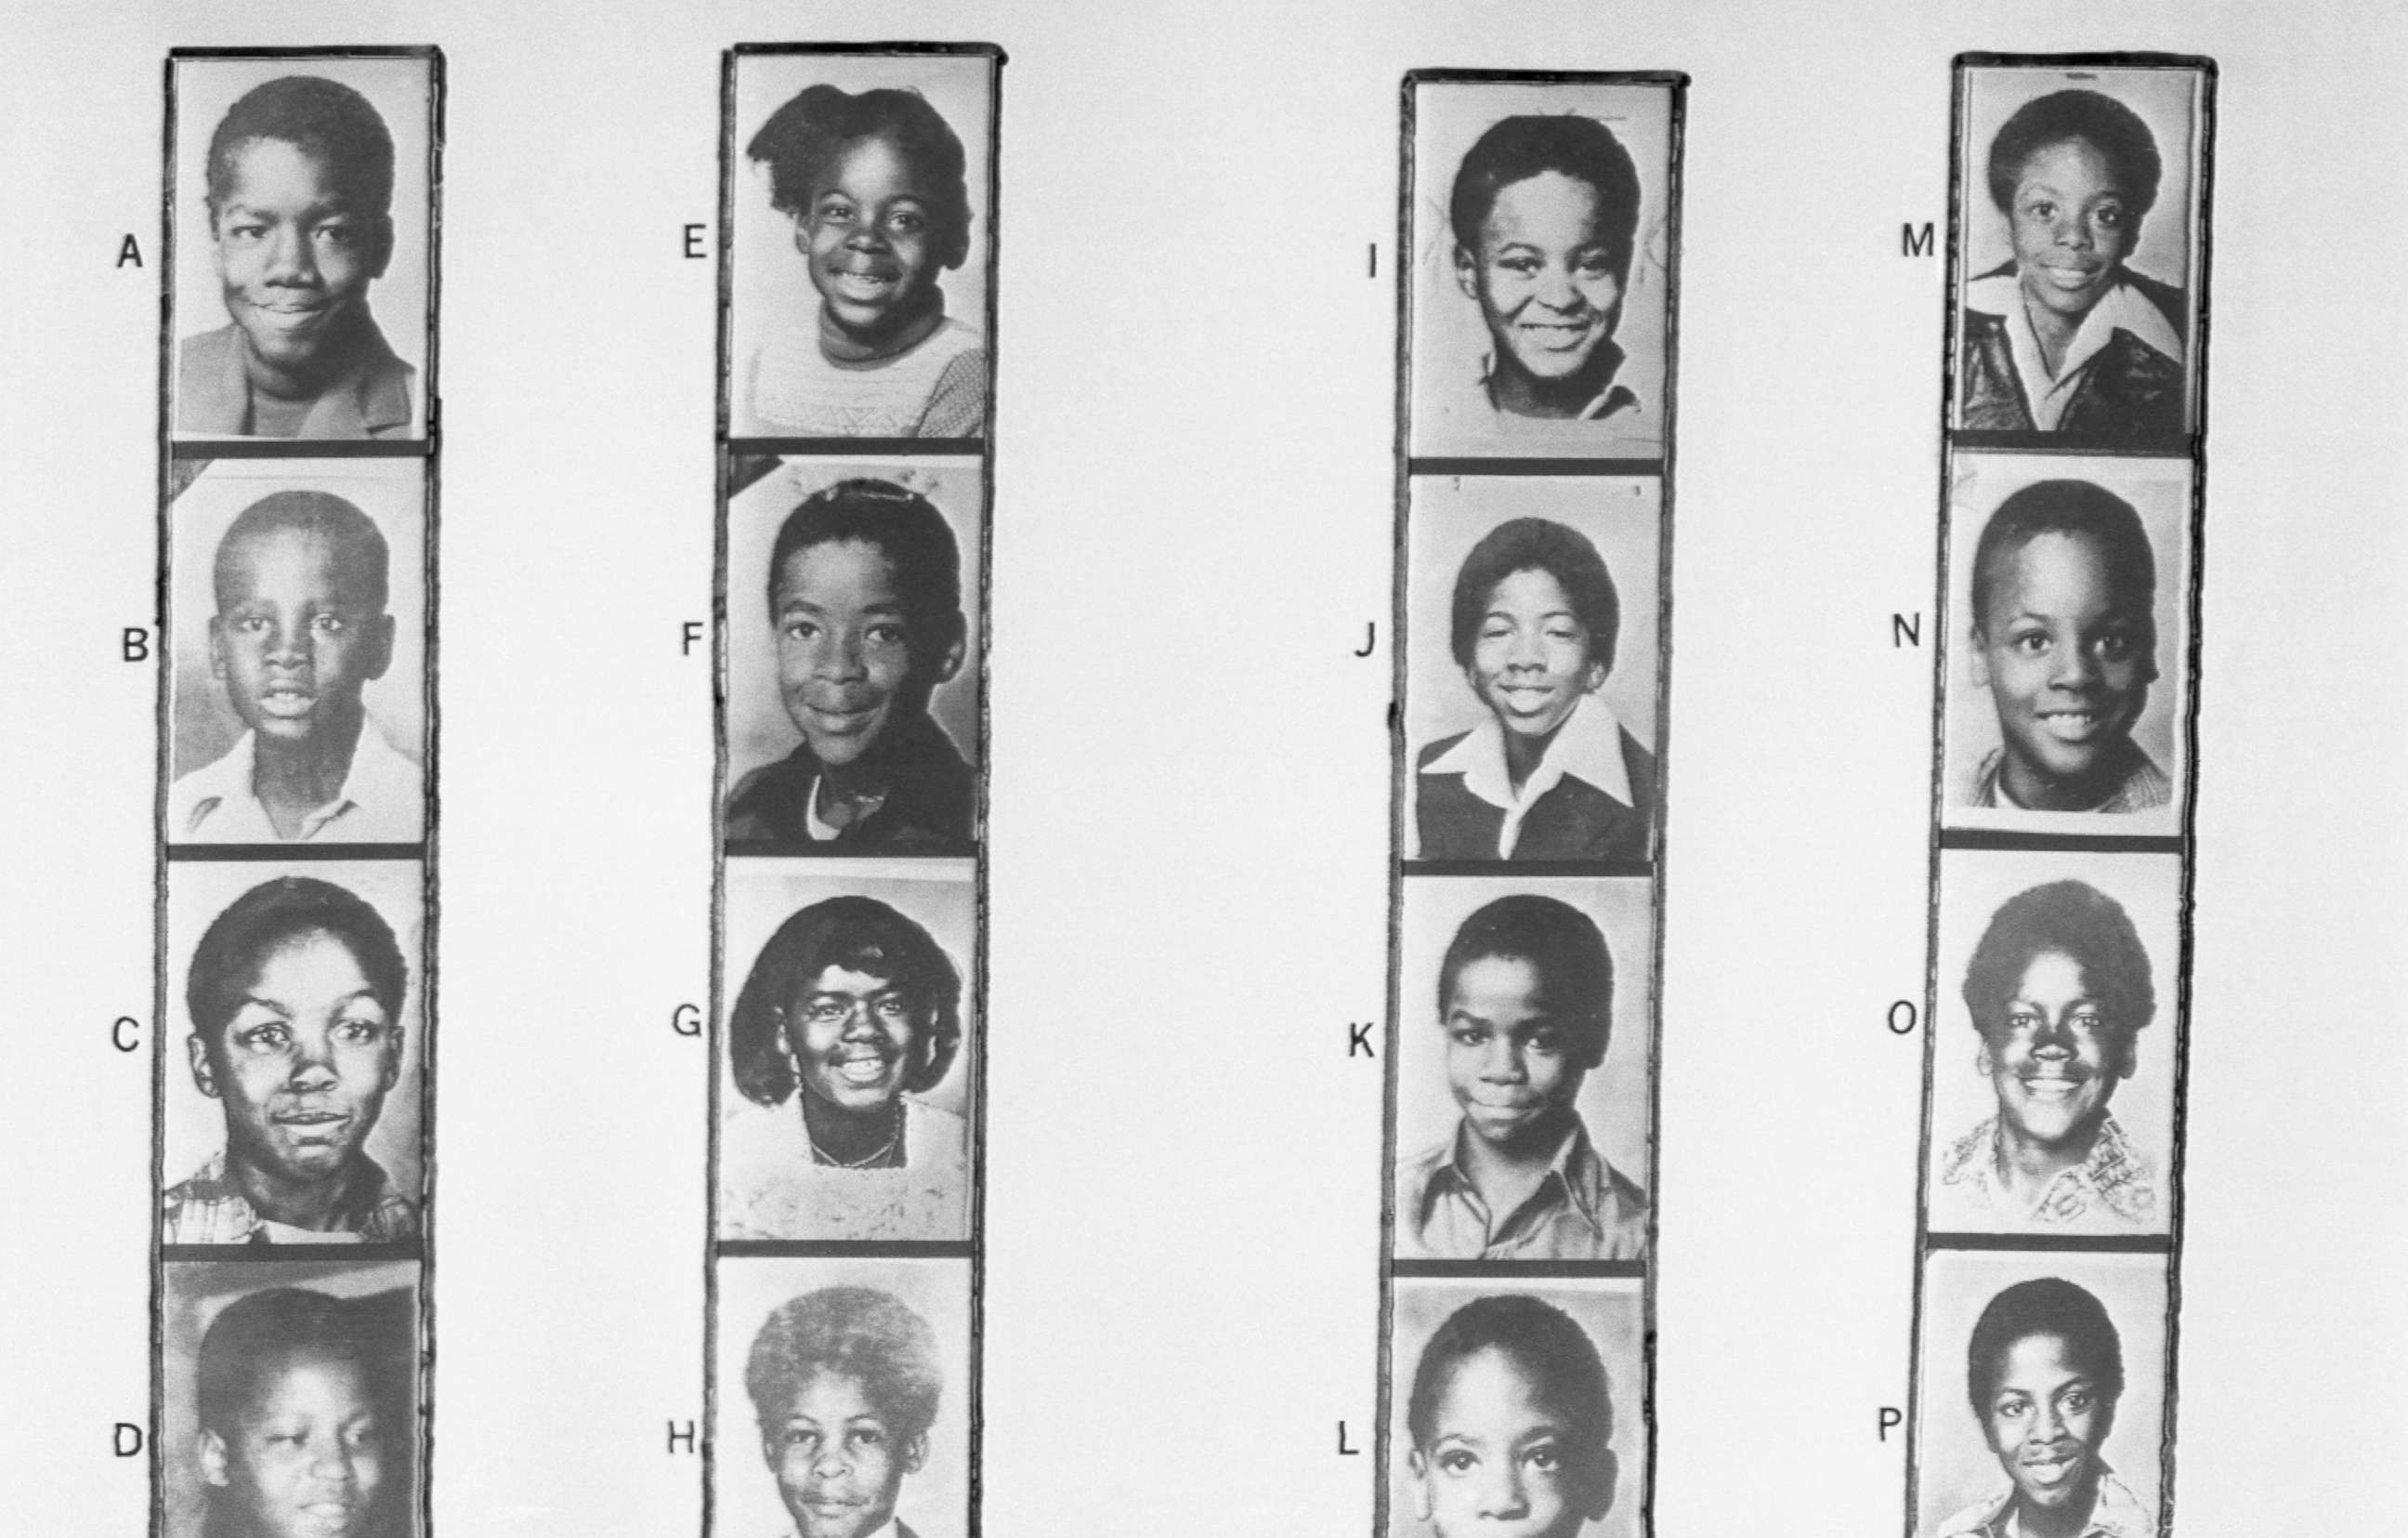 PHOTO: Some of the 20 missing and murdered children that disappeared in Atlanta from 1979-1981.